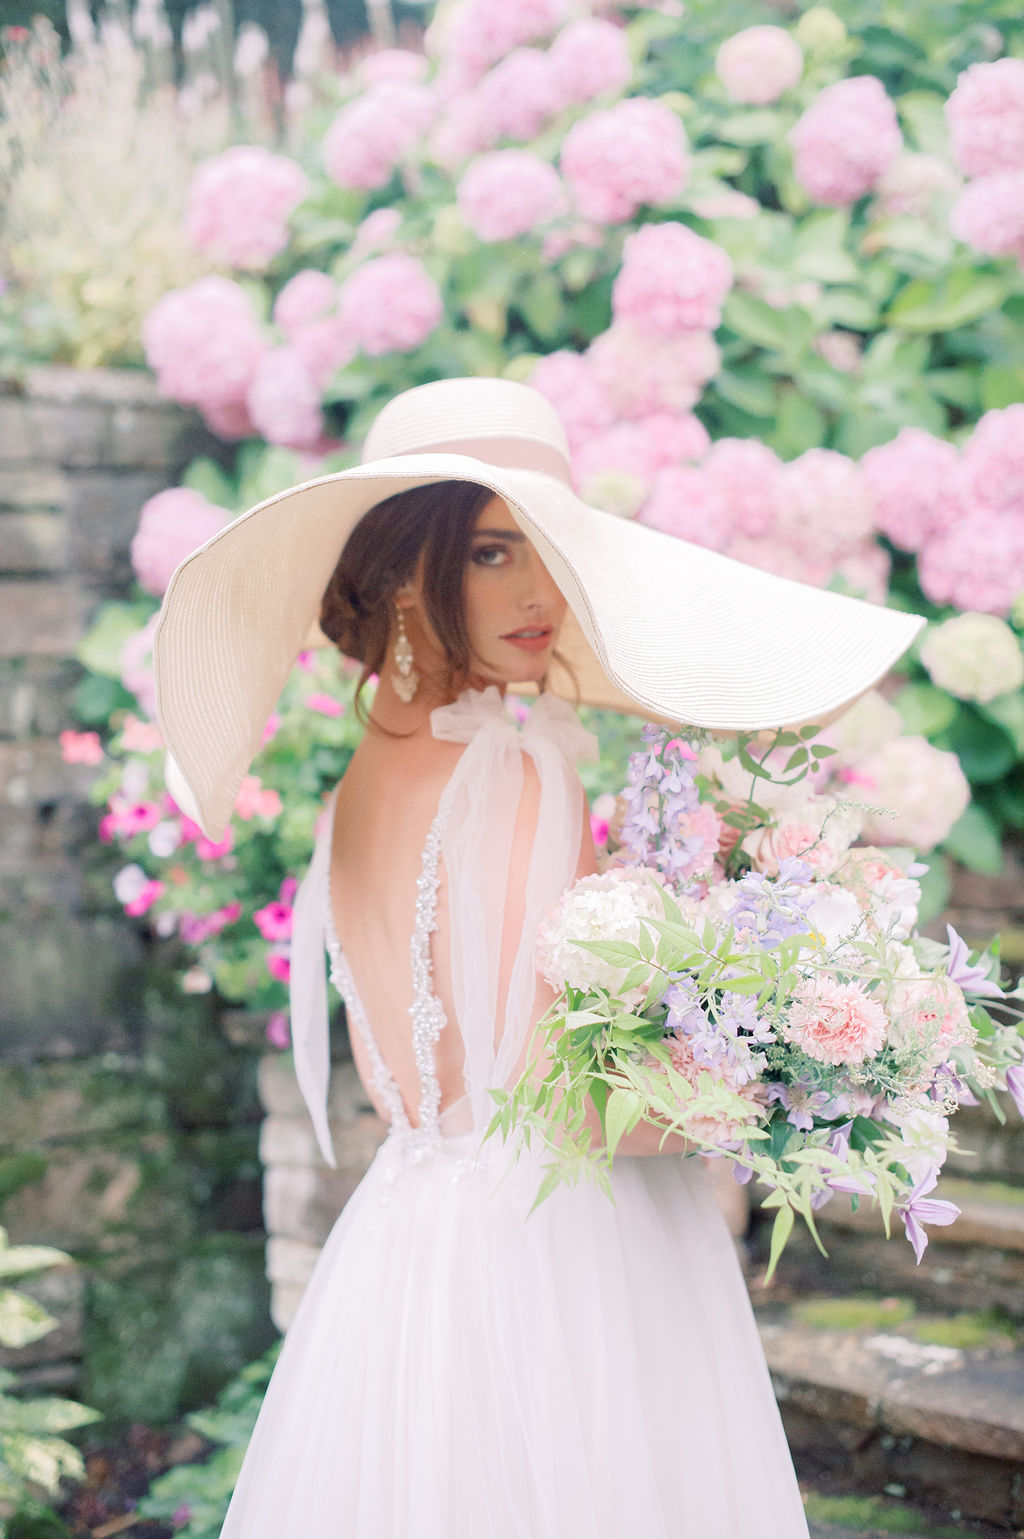 Bride in sunhat holding bouquet of flowers at Hedsor House, England